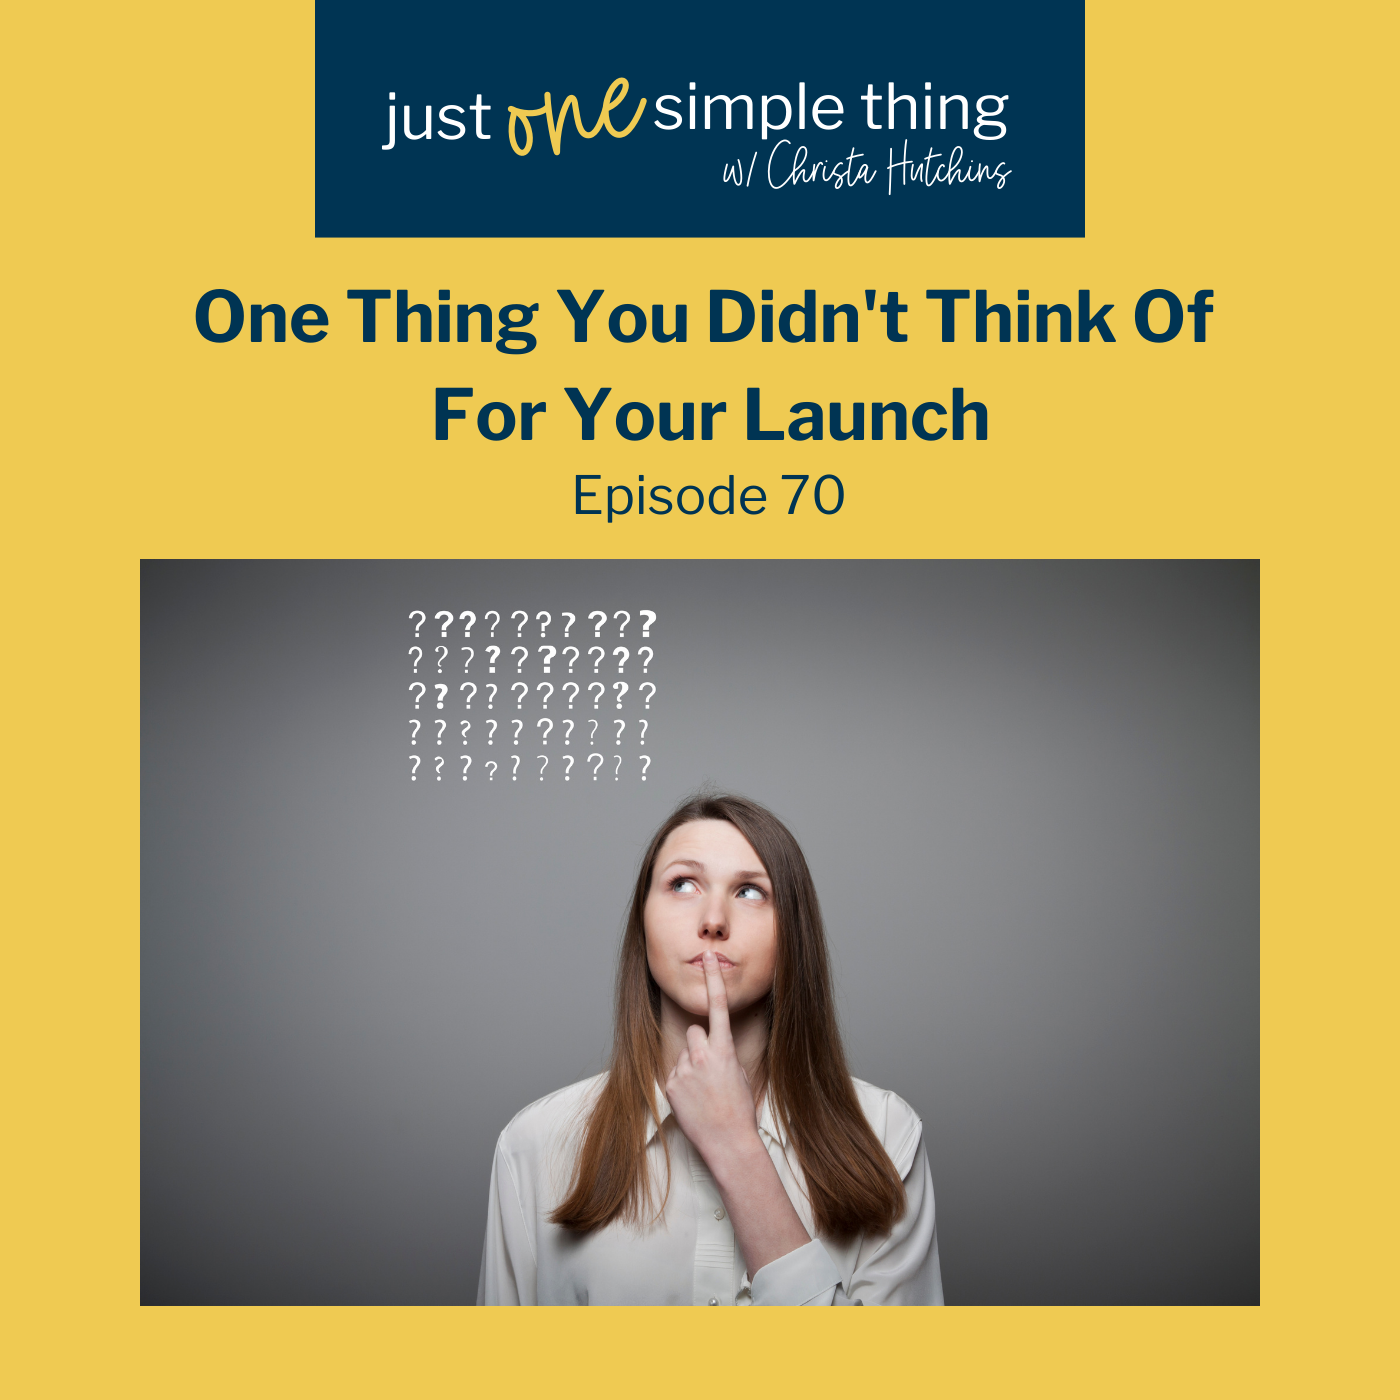 One Thing You Didn't Think of For Your Launch Plan